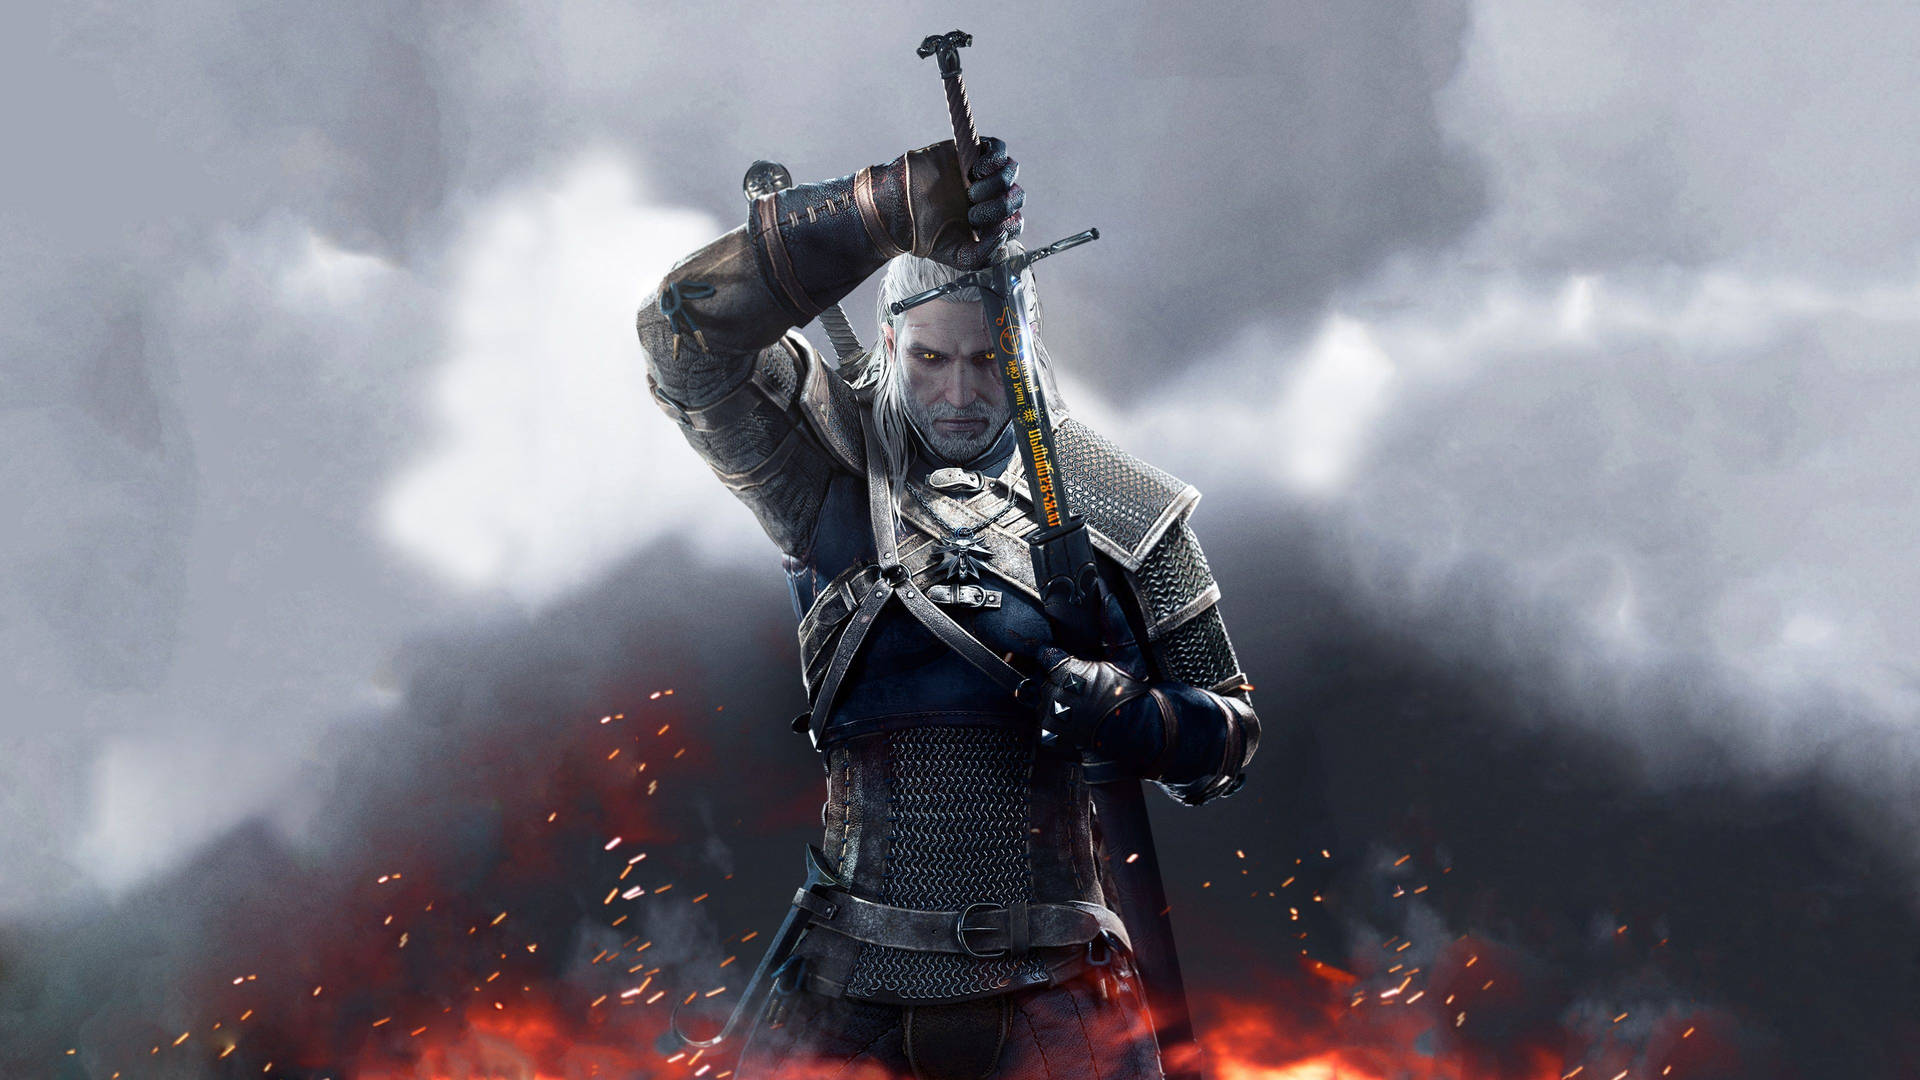 Witcher3 Geralt In 4k Is Translated To German As 